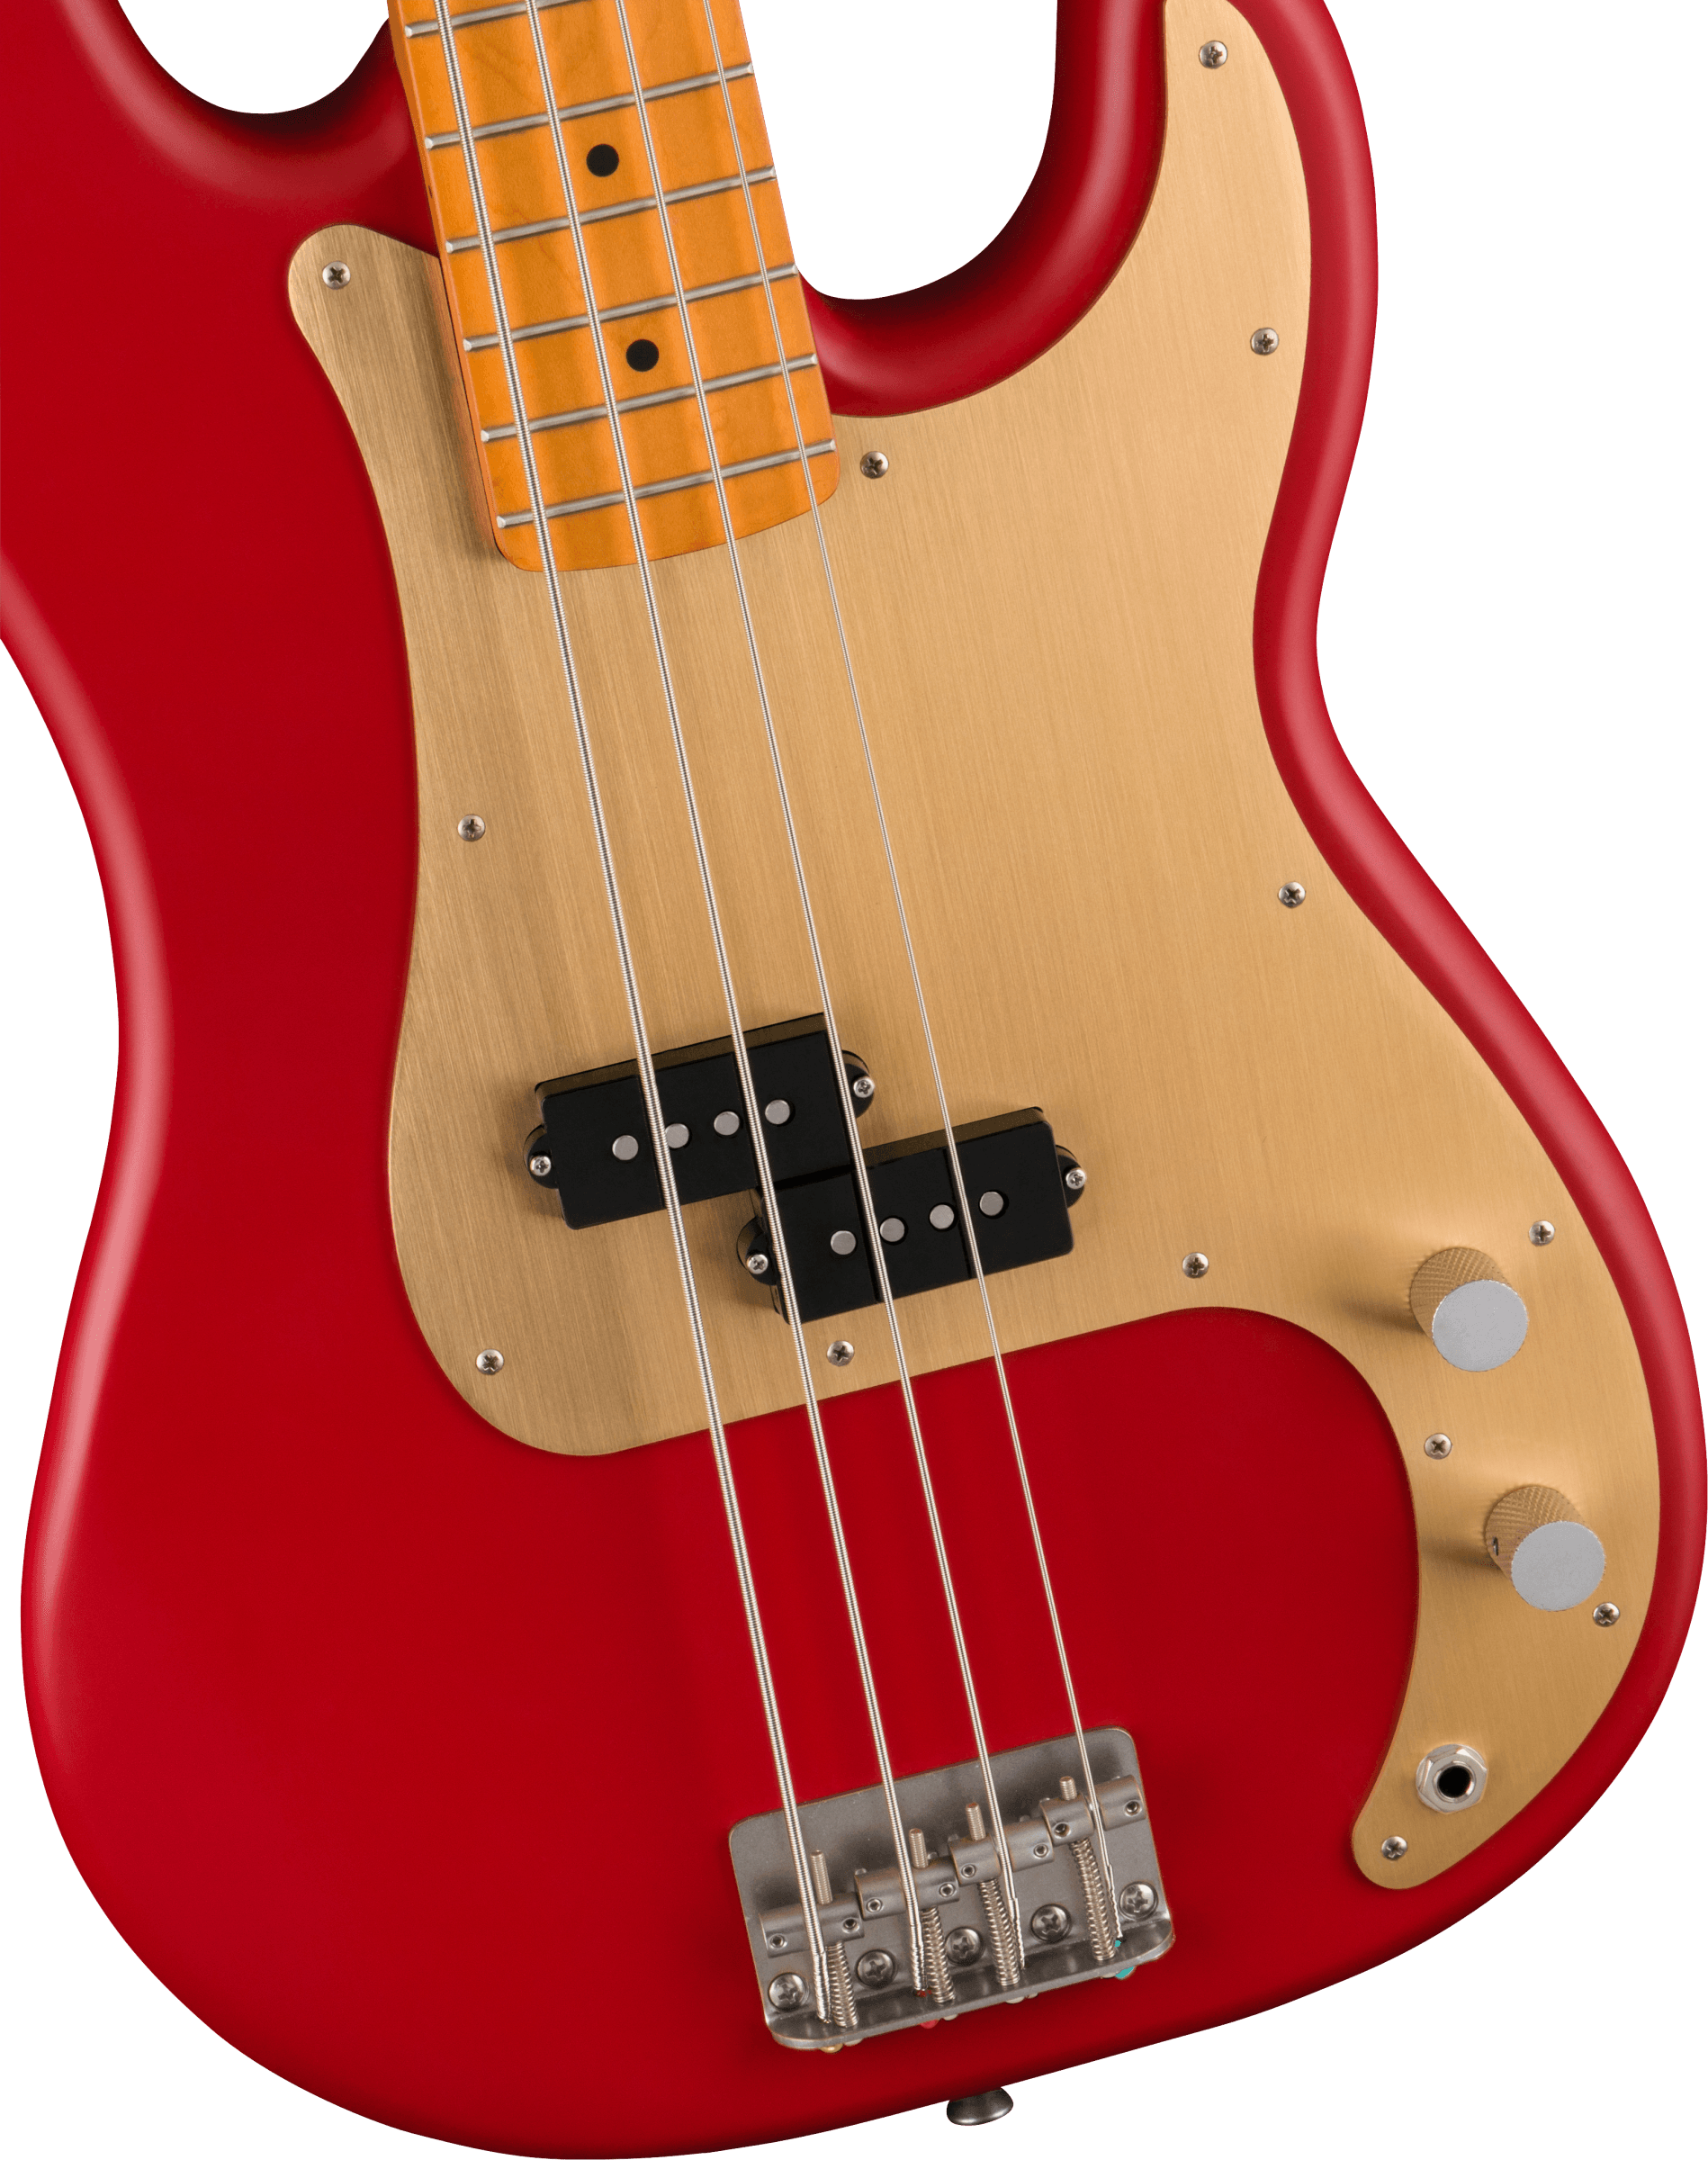 Squier Precision Bass 40th Anniversary Gold Edition Mn - Satin Dakota Red - Basse Électrique Solid Body - Variation 2